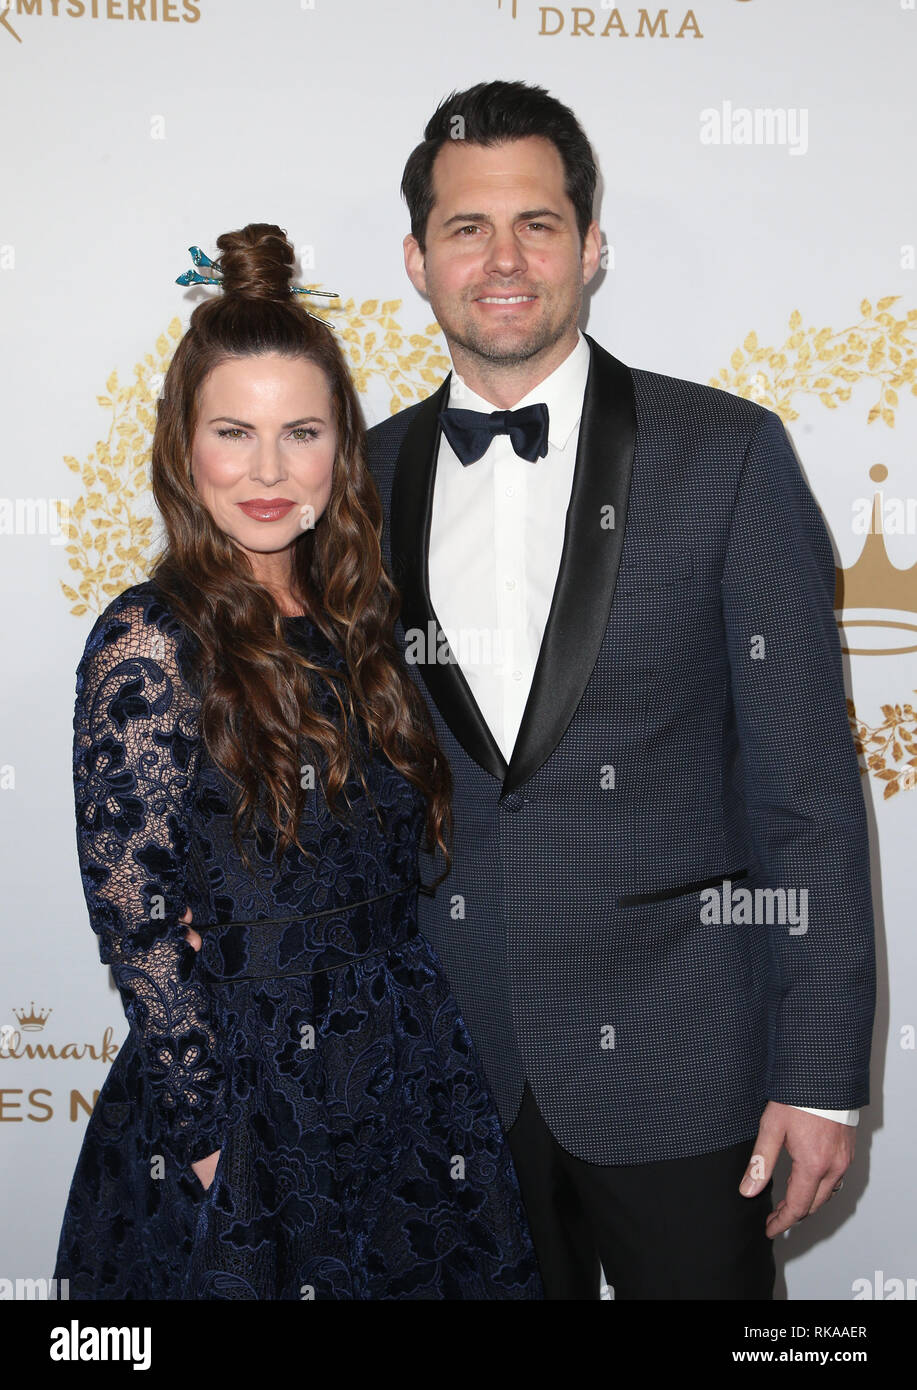 PASADENA, CA - FEBRUARY 9: Kristoffer Polaha, Julianne Morris, at the Hallmark Channel and Hallmark Movies & Mysteries Winter 2019 TCA at Tournament House in Pasadena, California on February 9, 2019. Credit: Faye Sadou/MediaPunch Stock Photo